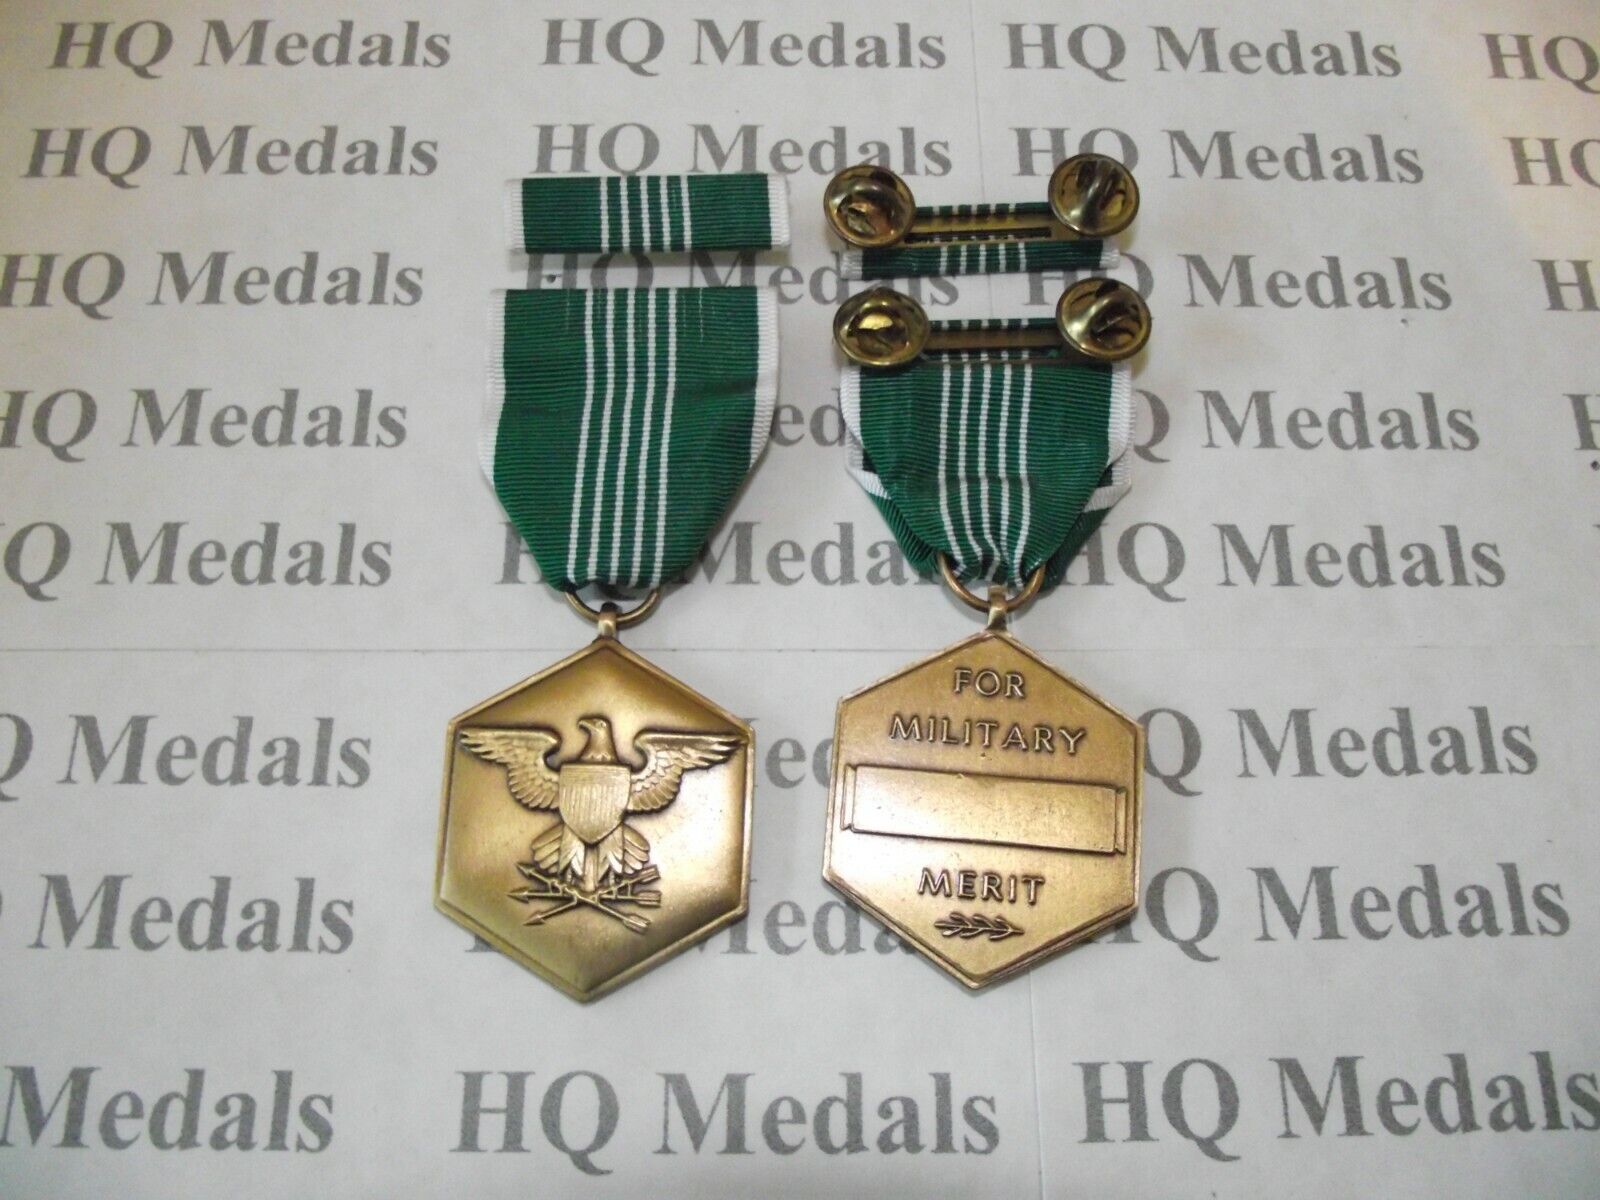 United States Army Commendation Medal with Ribbon and pin